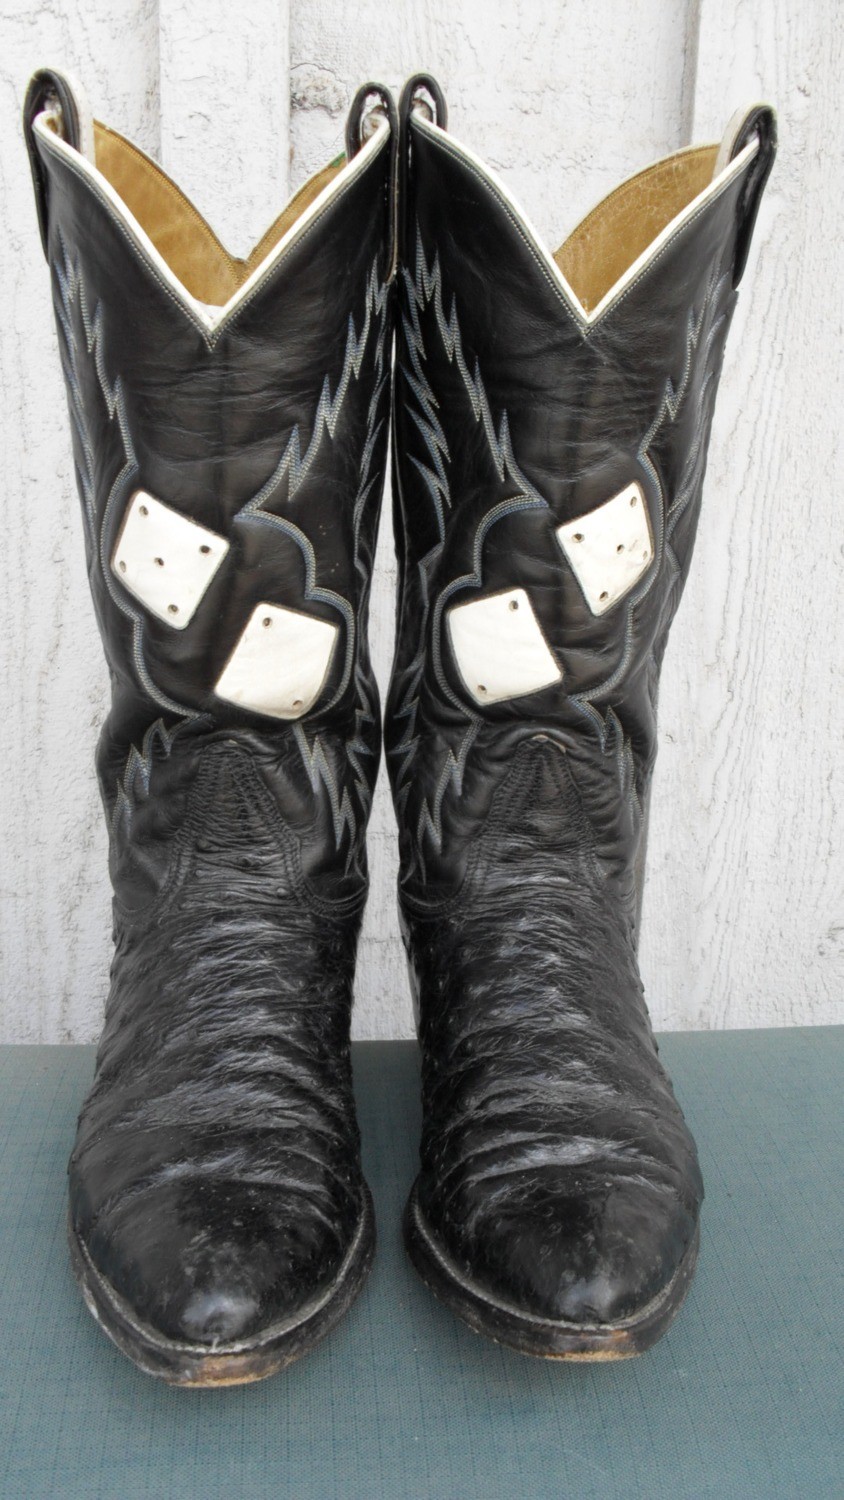 Roll the Dice on these Tony Lama rockabilly boots!